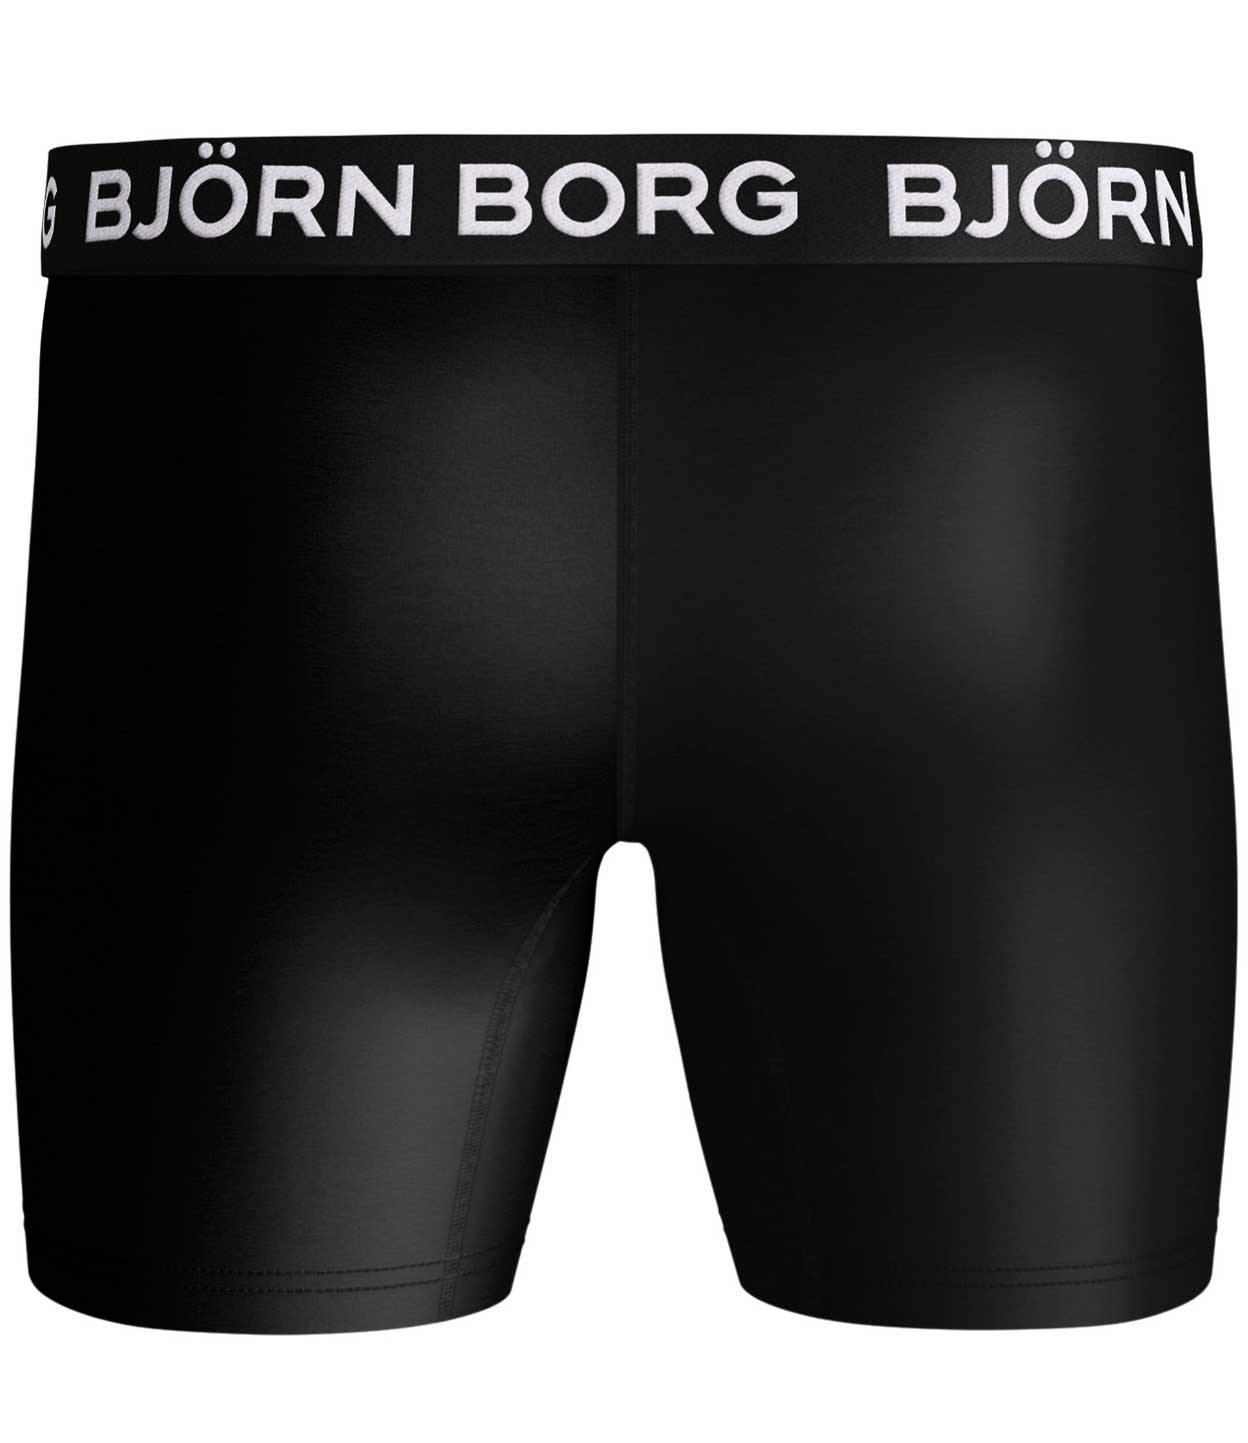 Performance Shorts - 2 pack